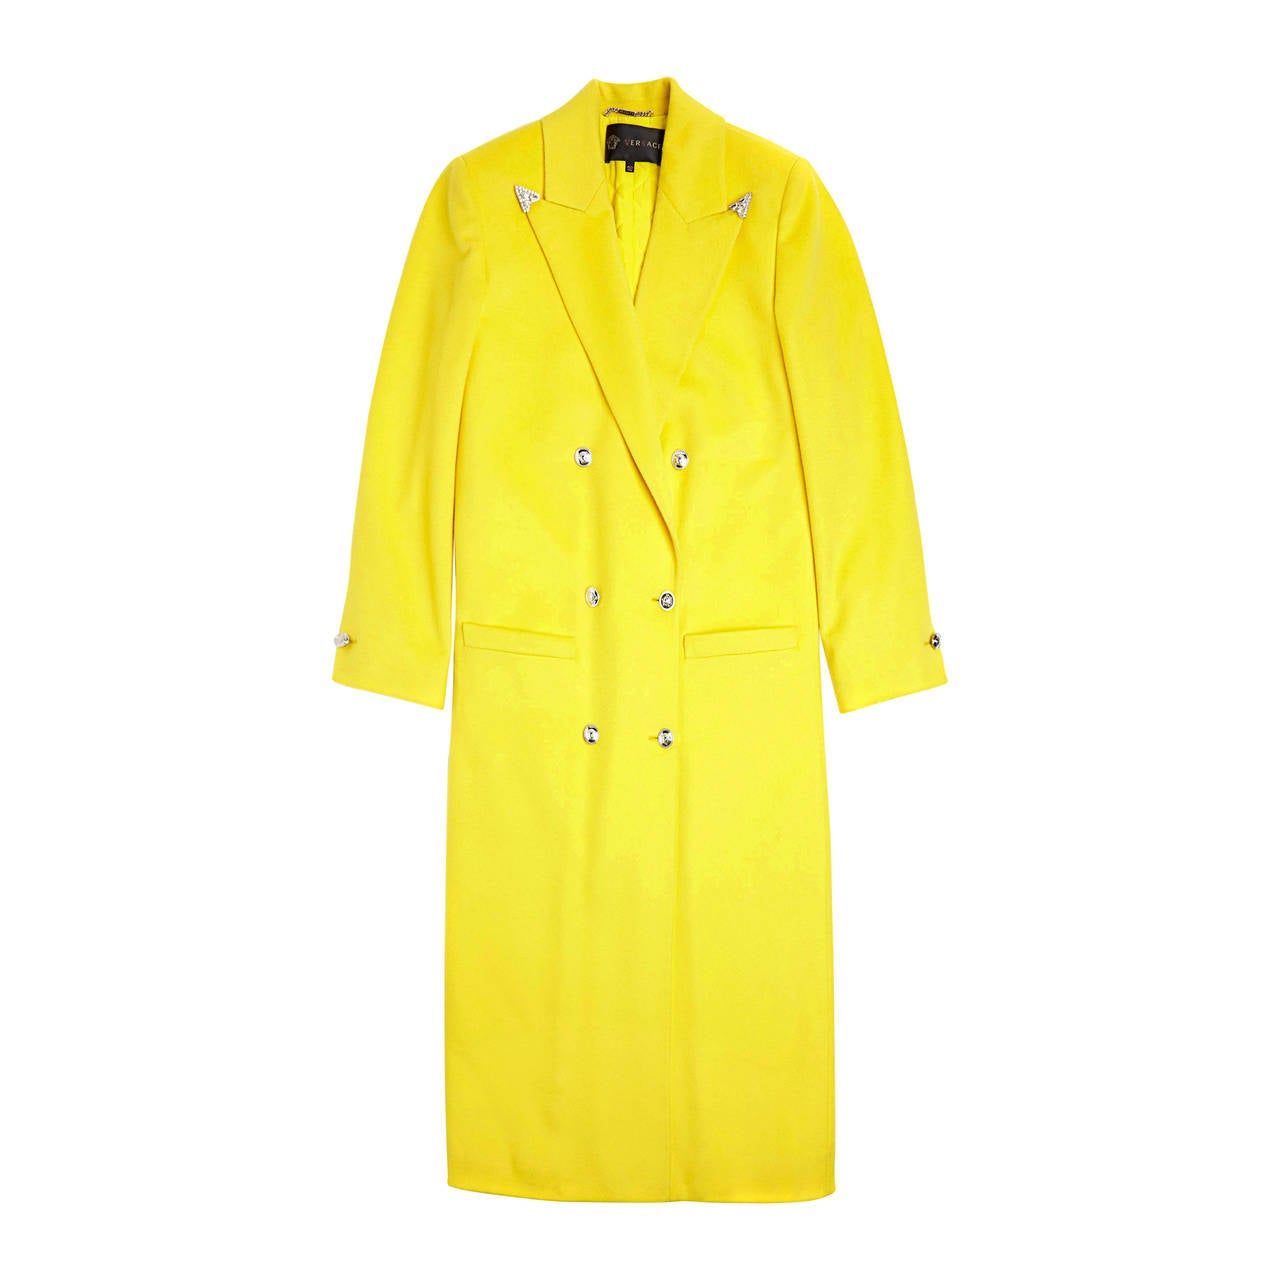 Versace Long Wool Cashmere Coat In Yellow For Sale at 1stdibs